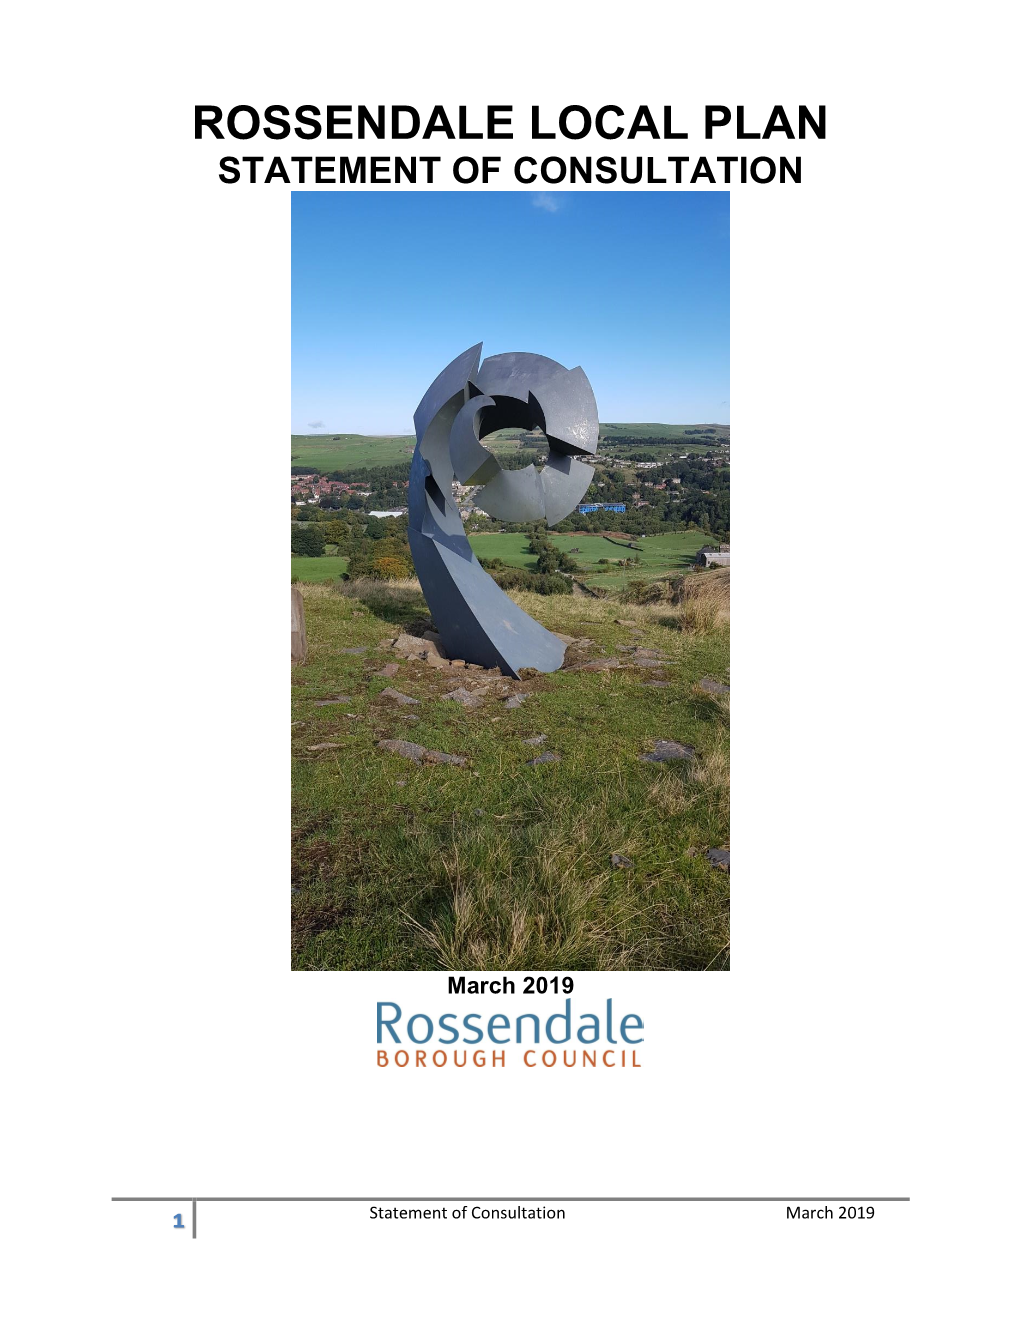 Rossendale Local Plan Statement of Consultation